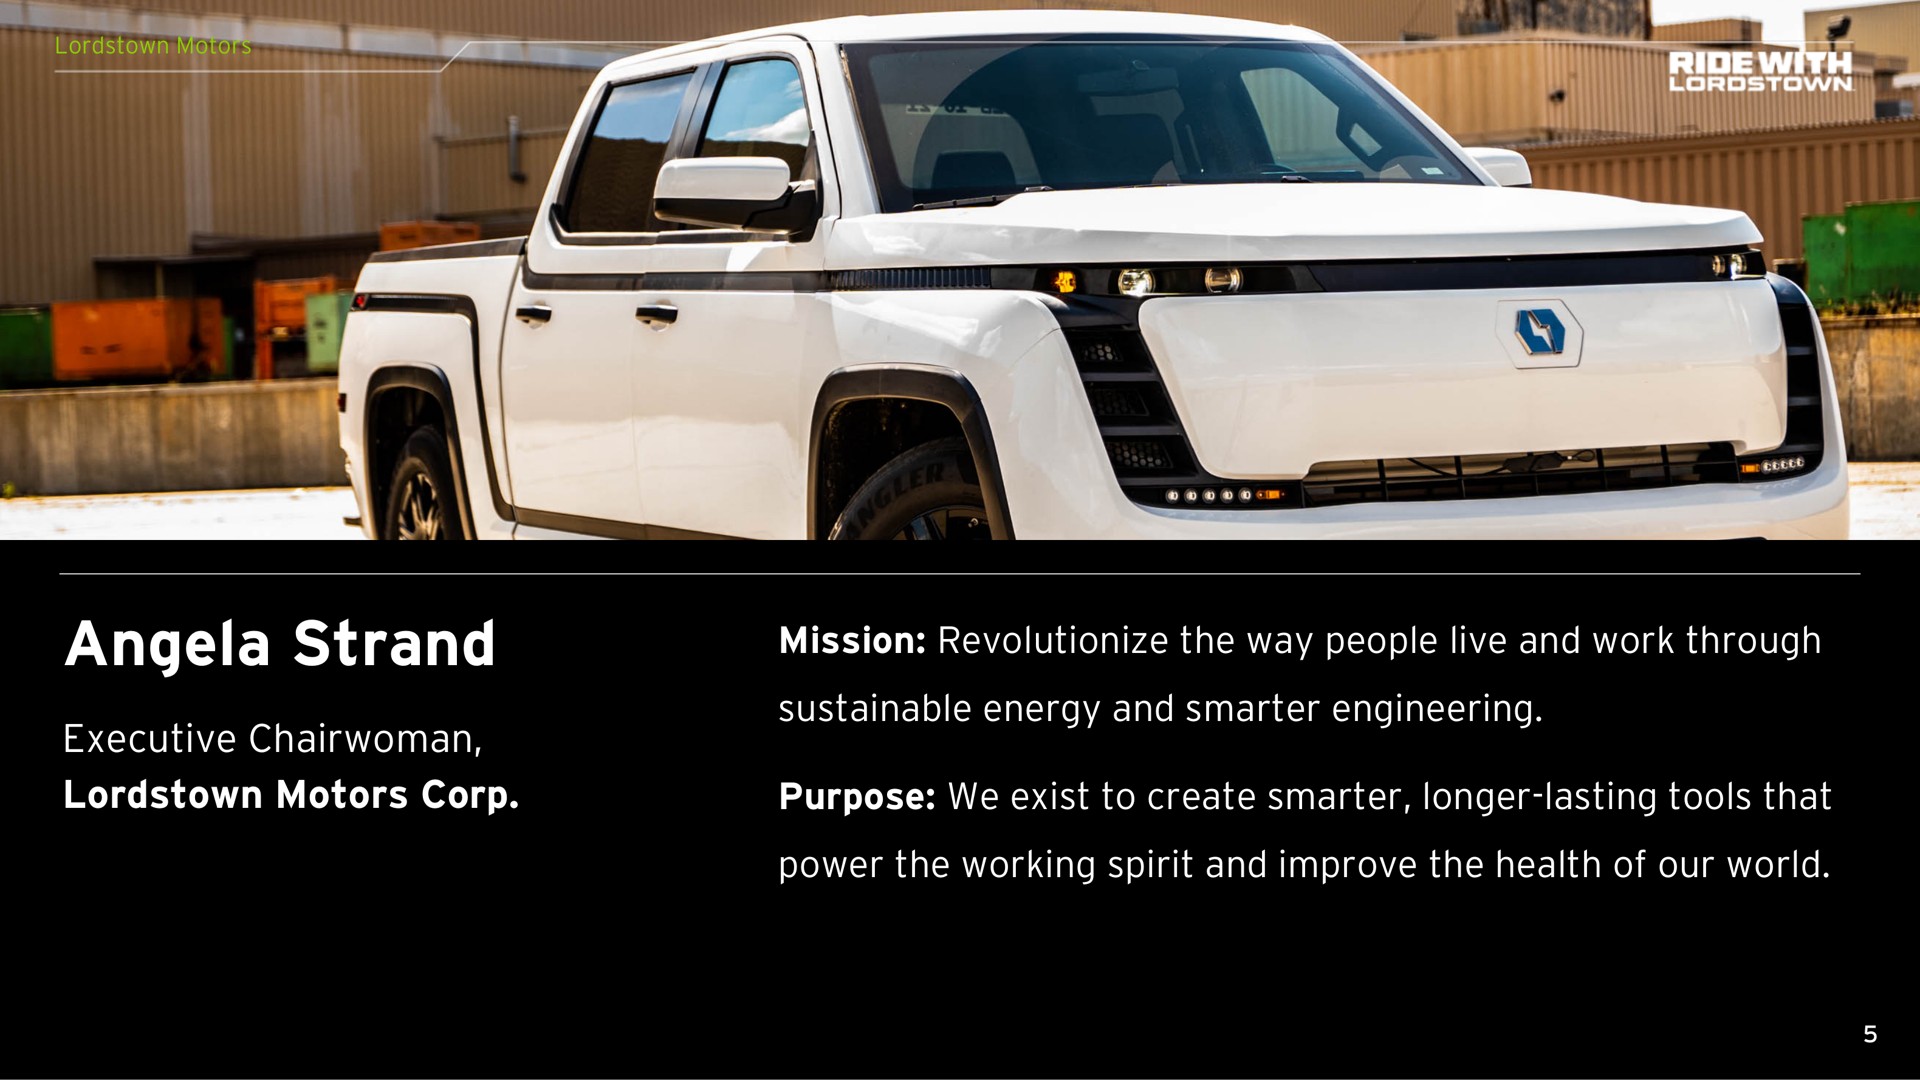 strand executive chairwoman motors corp mission revolutionize the way people live and work through sustainable energy and engineering purpose we exist to create longer lasting tools that power the working spirit and improve the health of our world a | Lordstown Motors